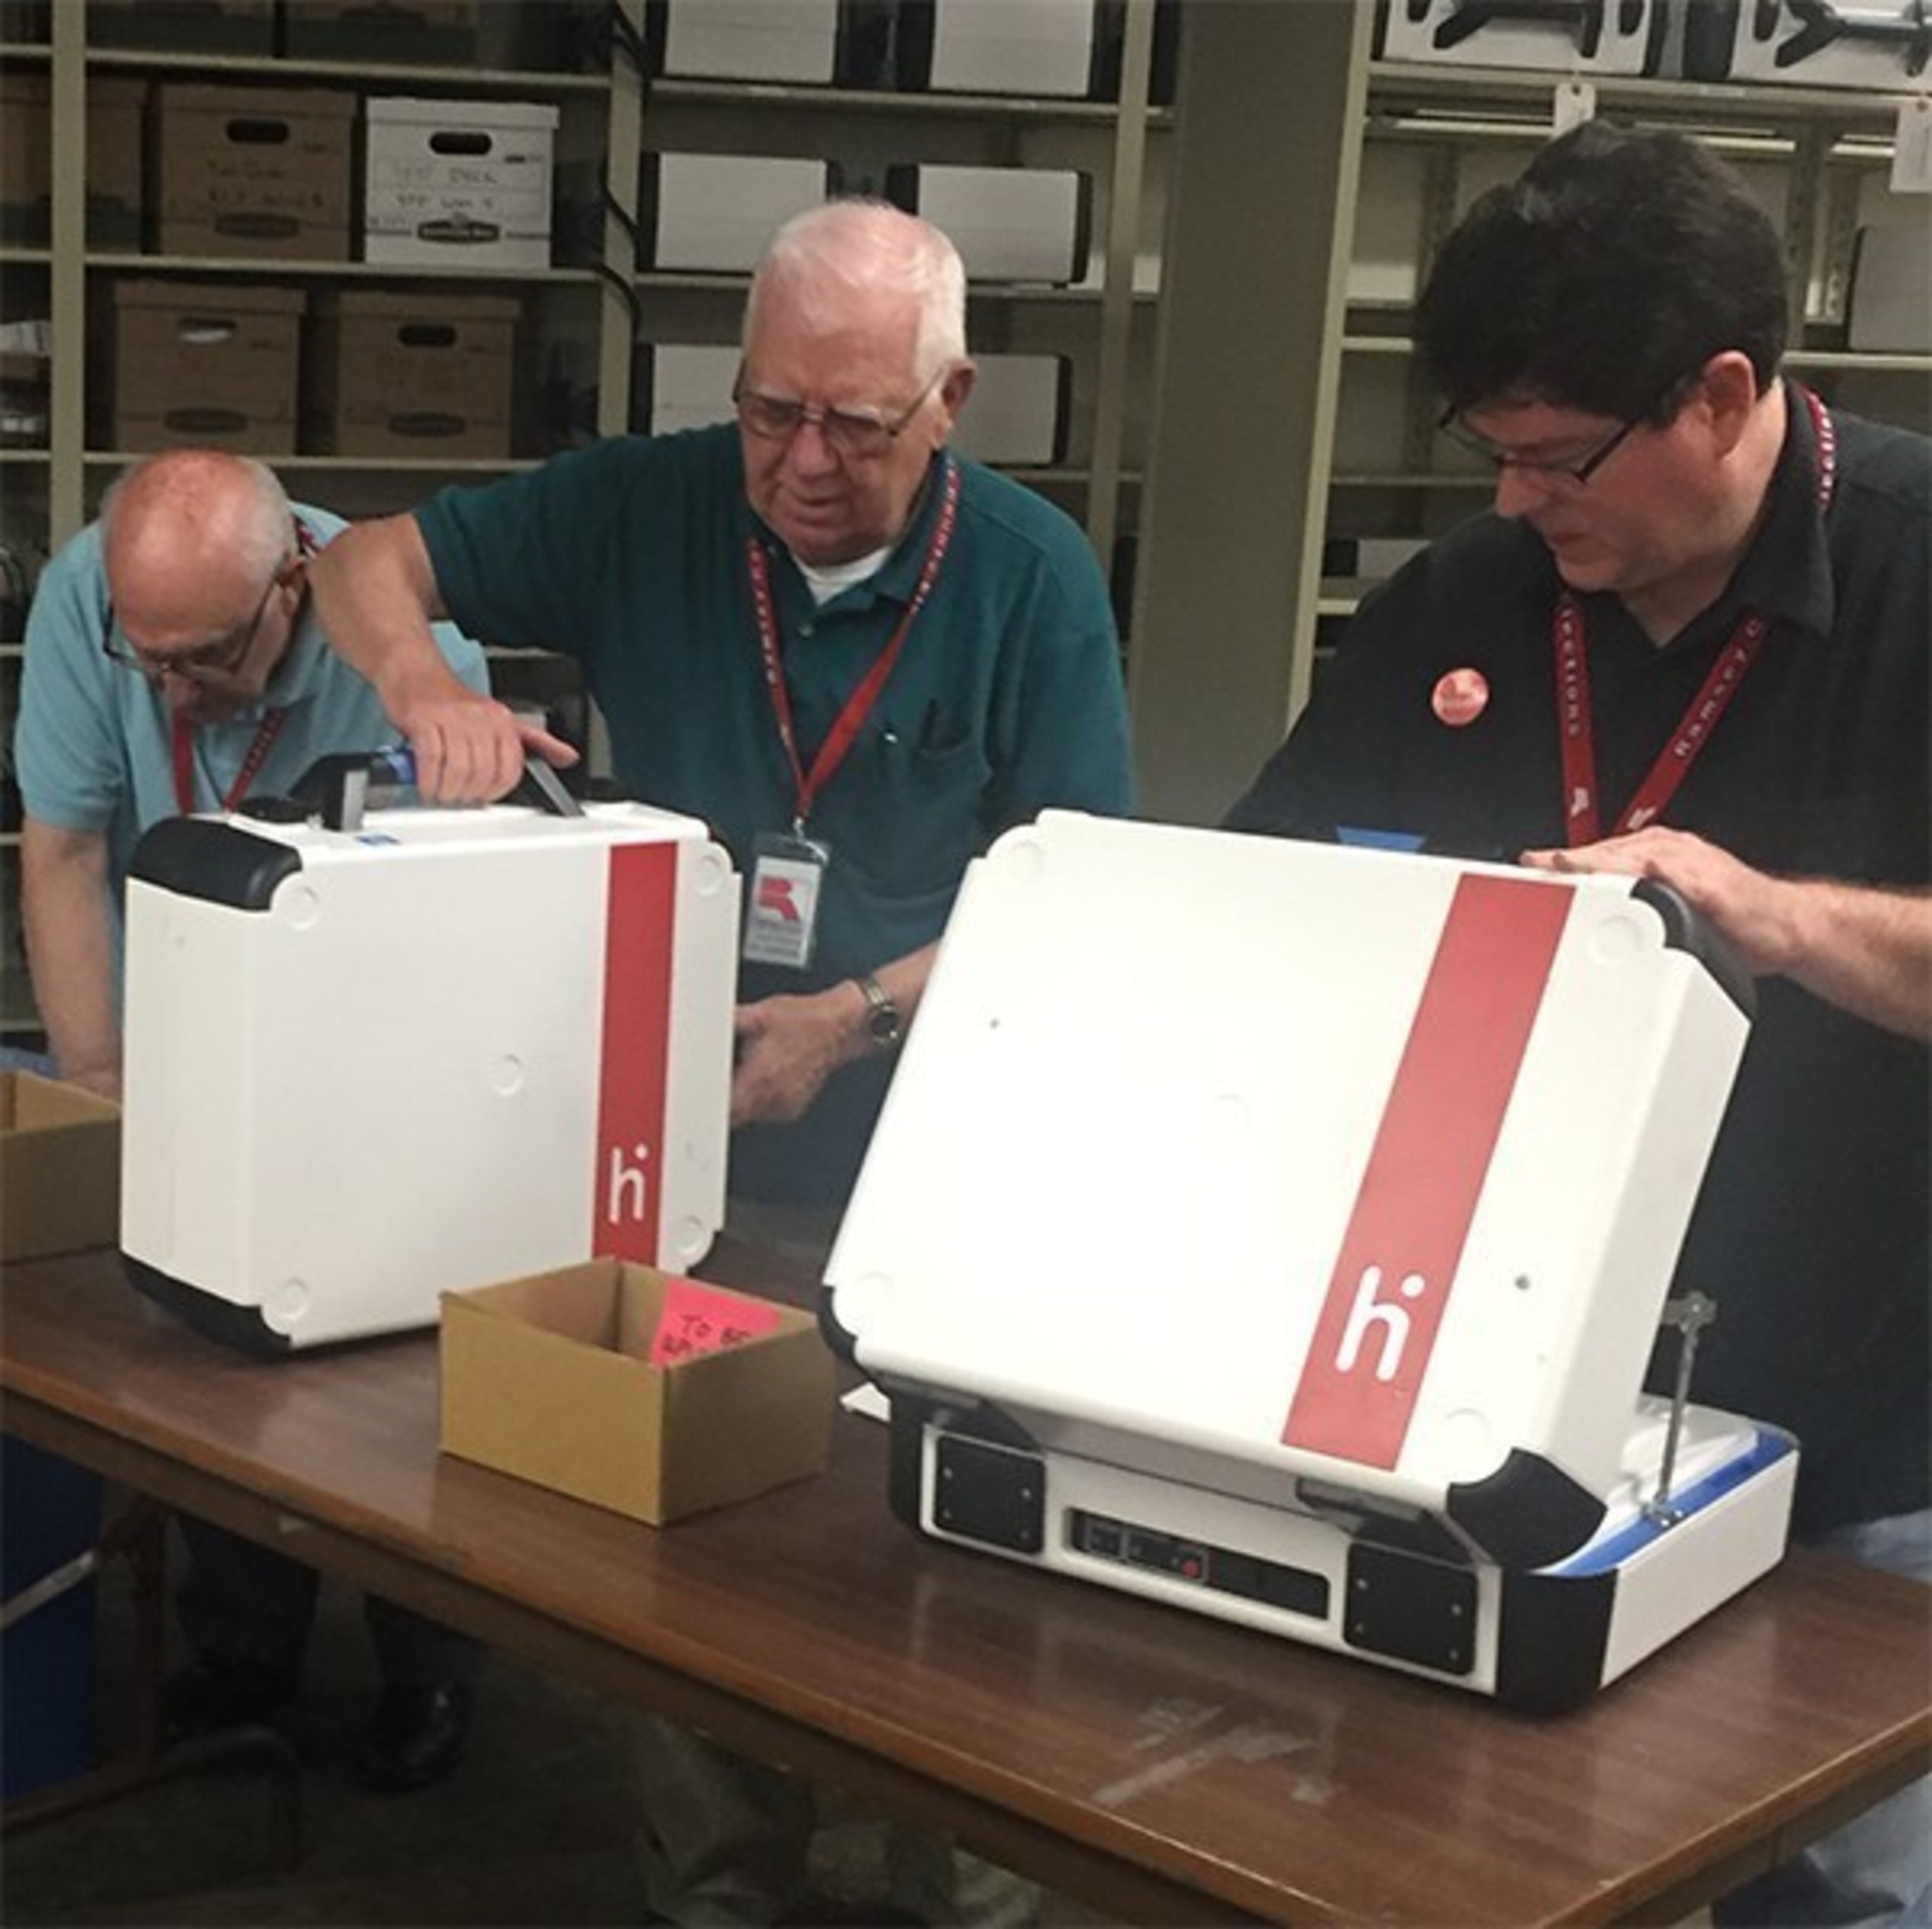 At the end of Election Day, locked and sealed Verity ballot counters are returned to Ramsey County headquarters to be opened by supervised elections staff.